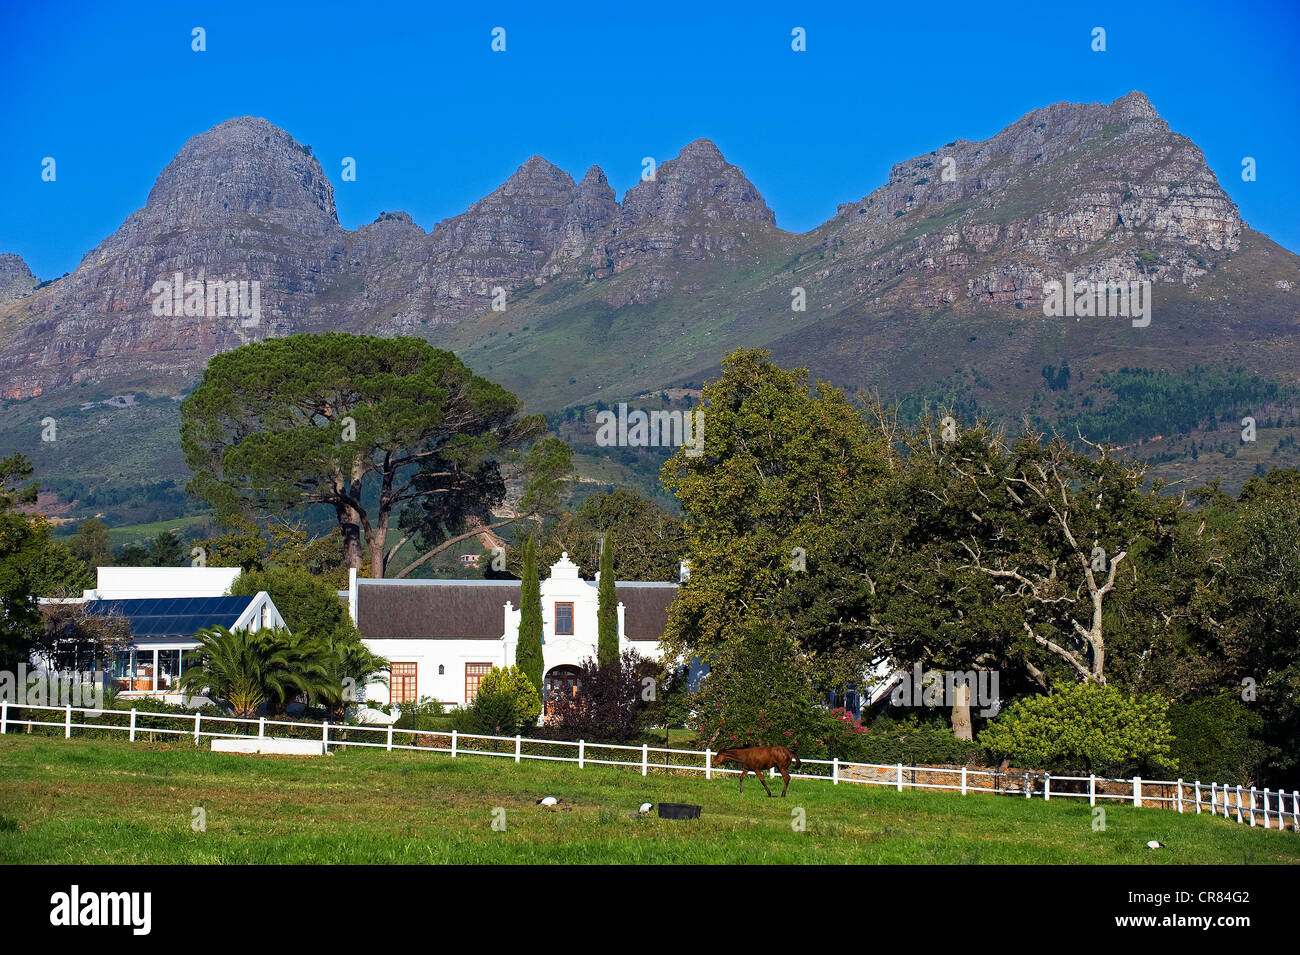 South Africa, Western Cape, Stellenbosch, Avontuur wine estate at the foot of the Hedelberg mountain, Dutch architecture Stock Photo